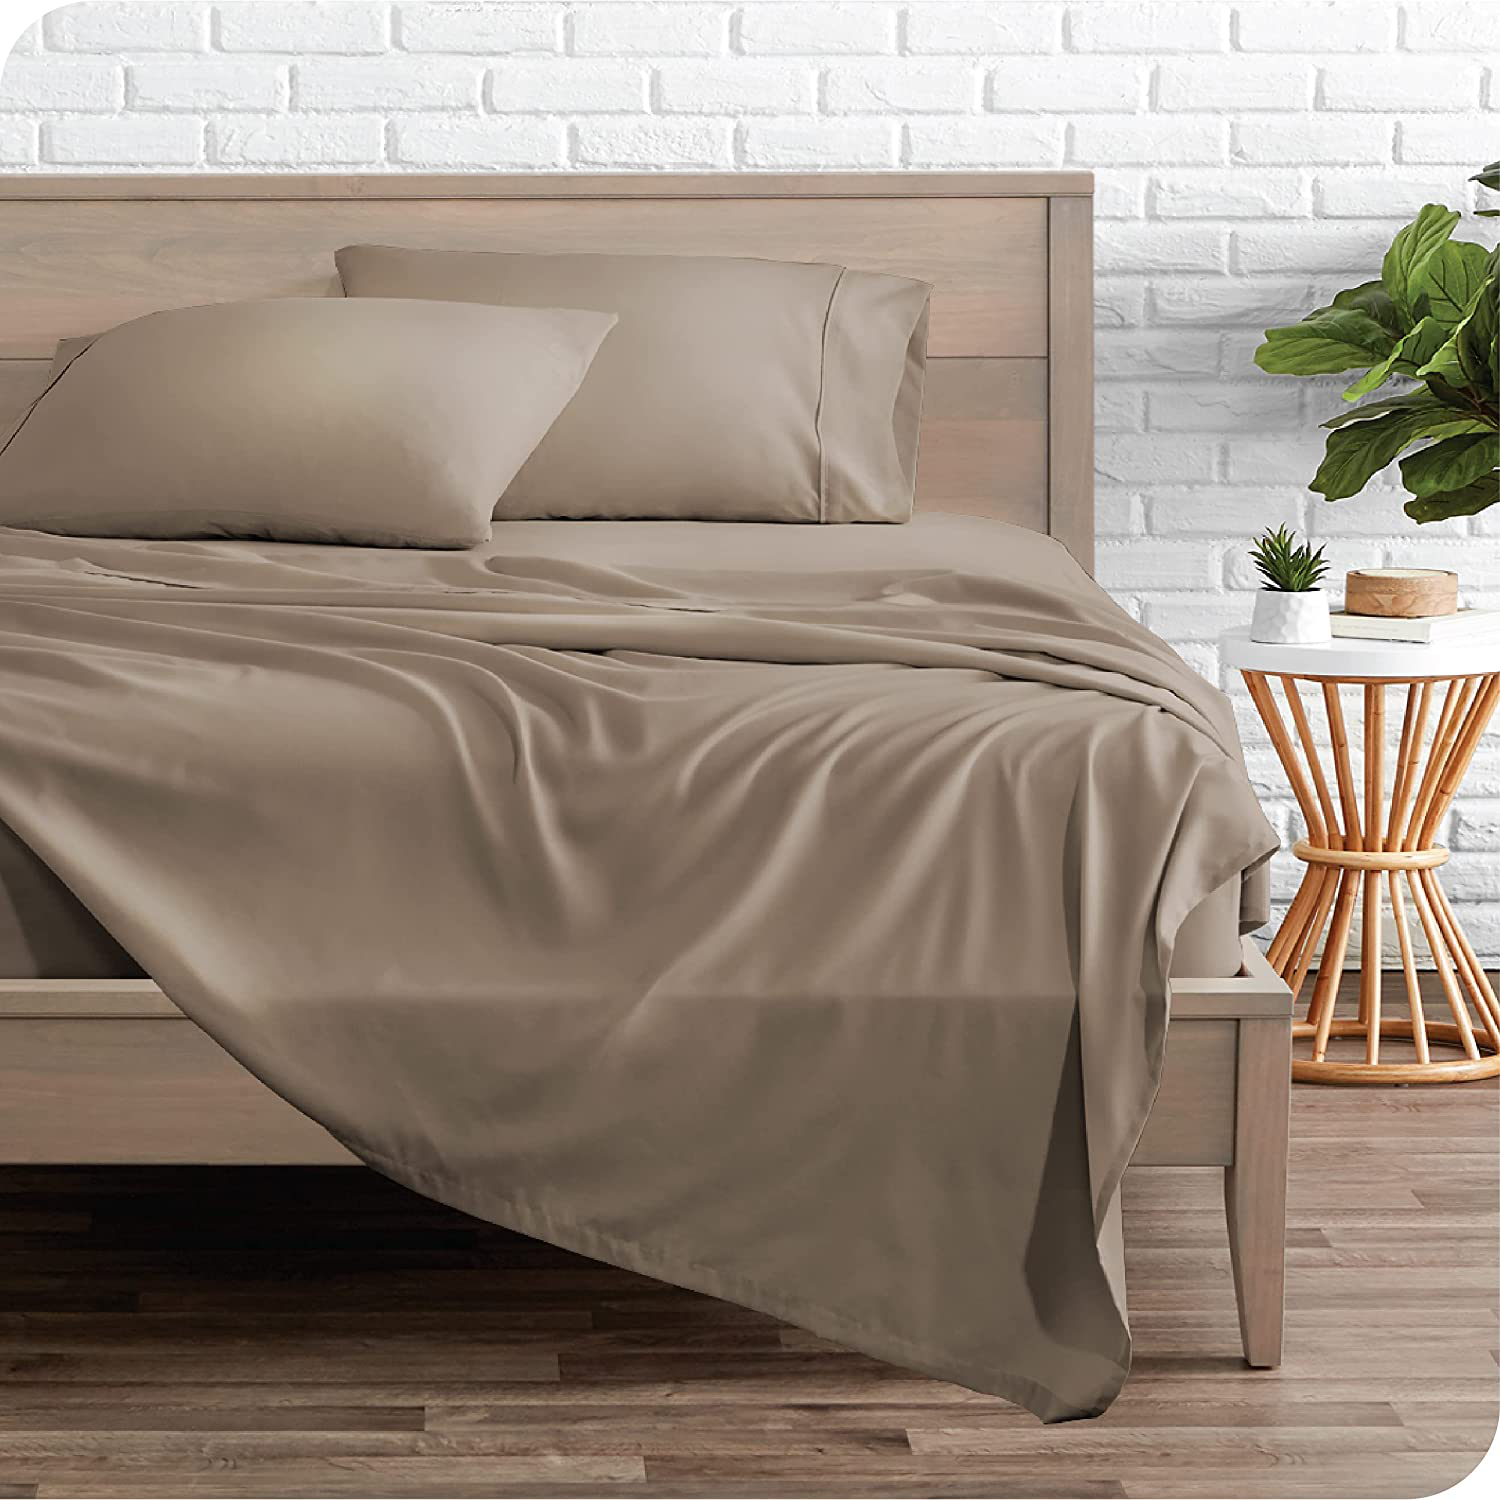 Bare Home Twin XL Sheet Set - College Dorm Size - Premium 1800 Ultra-Soft Microfiber Twin Extra Long Sheets - Double Brushed - Twin XL Sheets Set - Deep Pocket - Bed Sheets (Twin XL, Taupe)